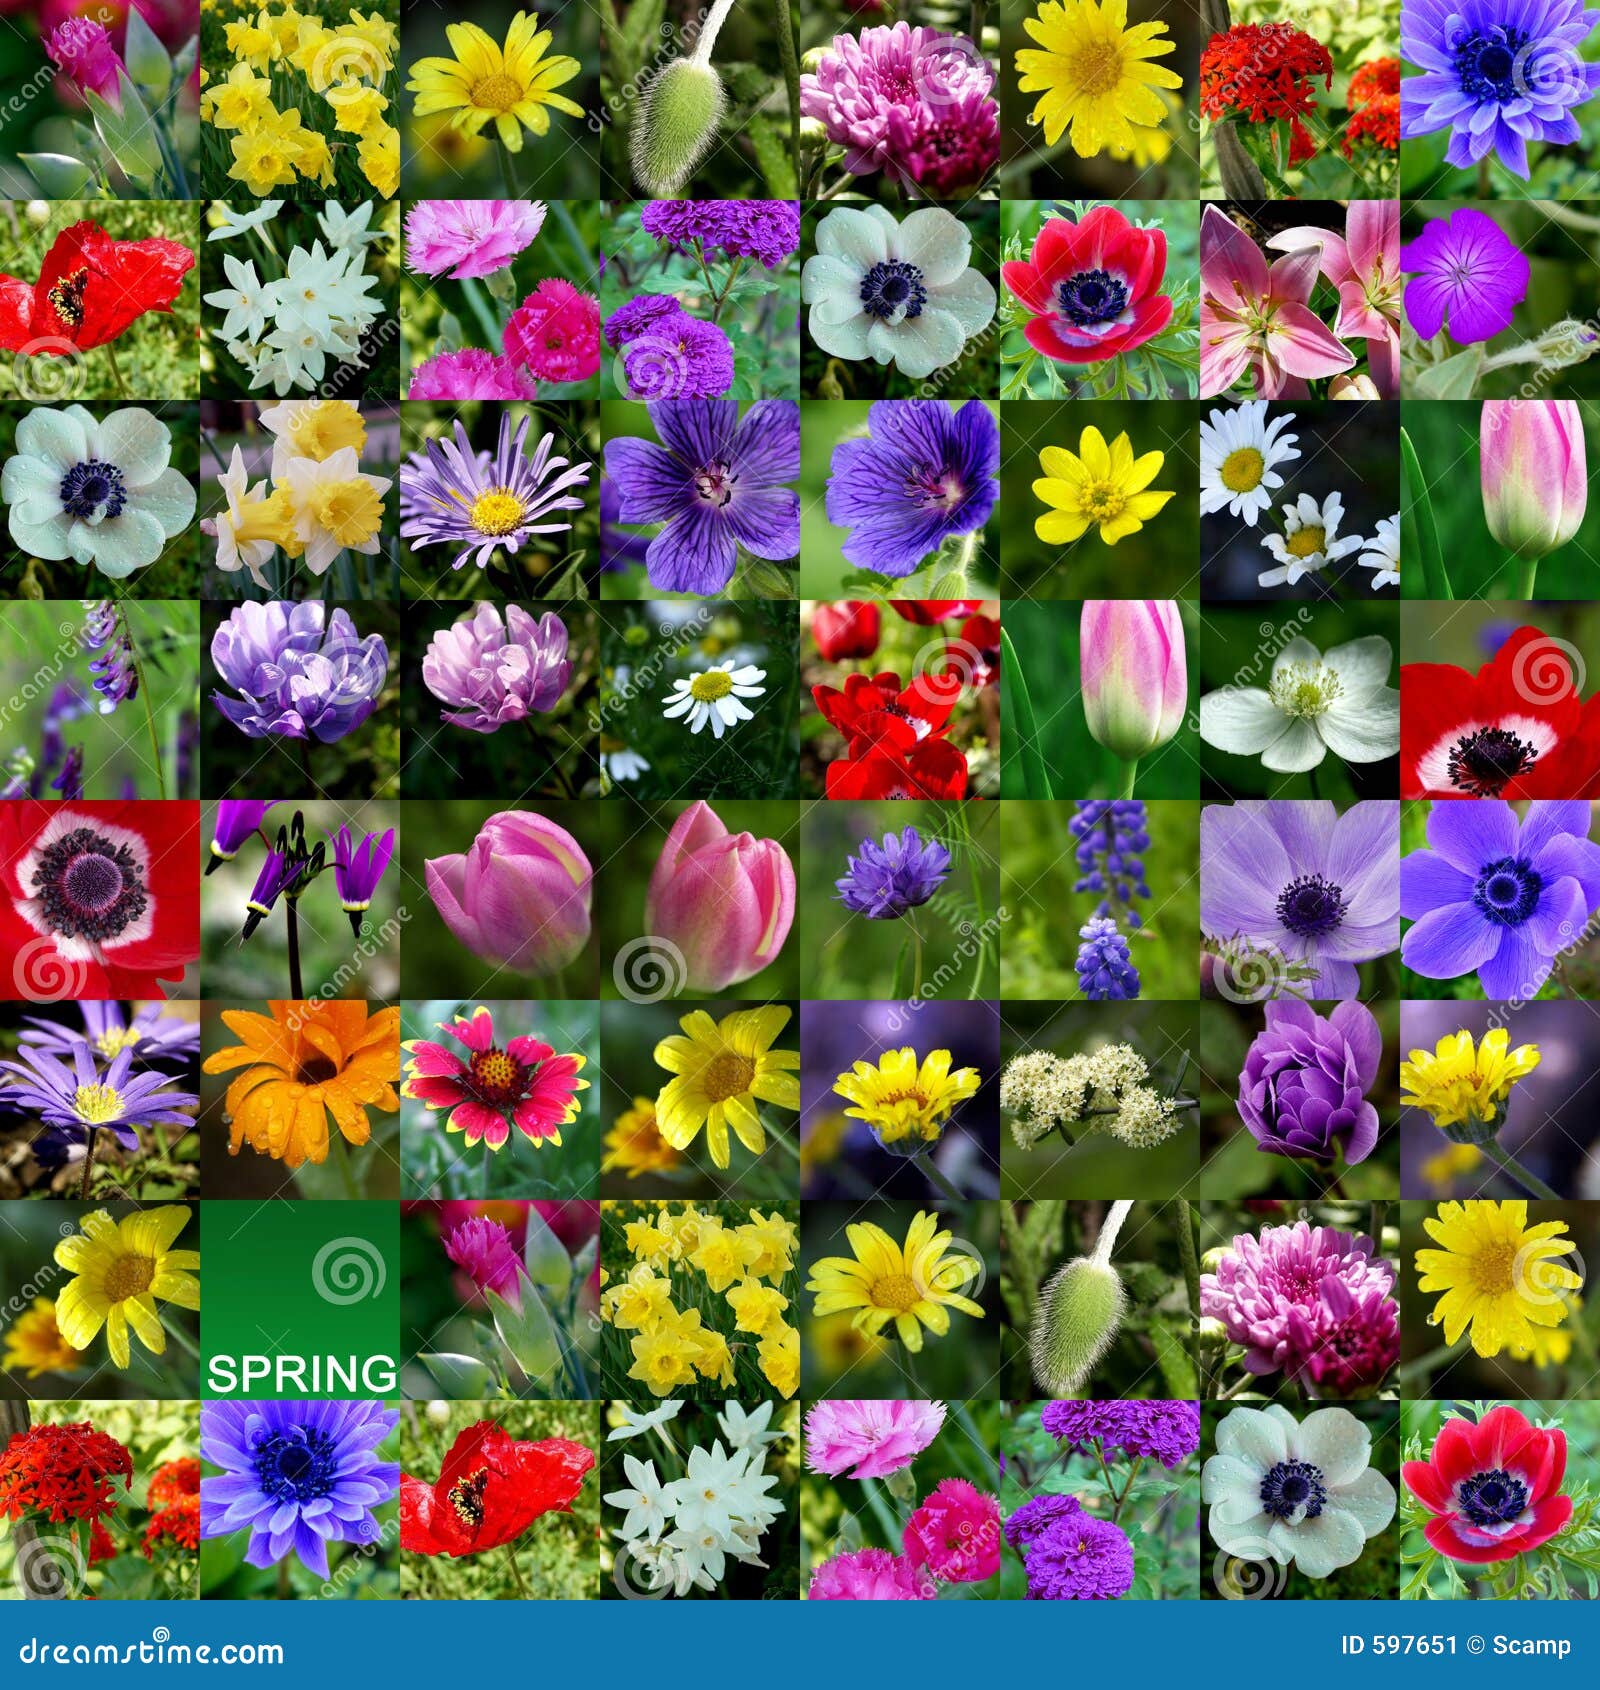 Stock Image: Spring Flower Collection